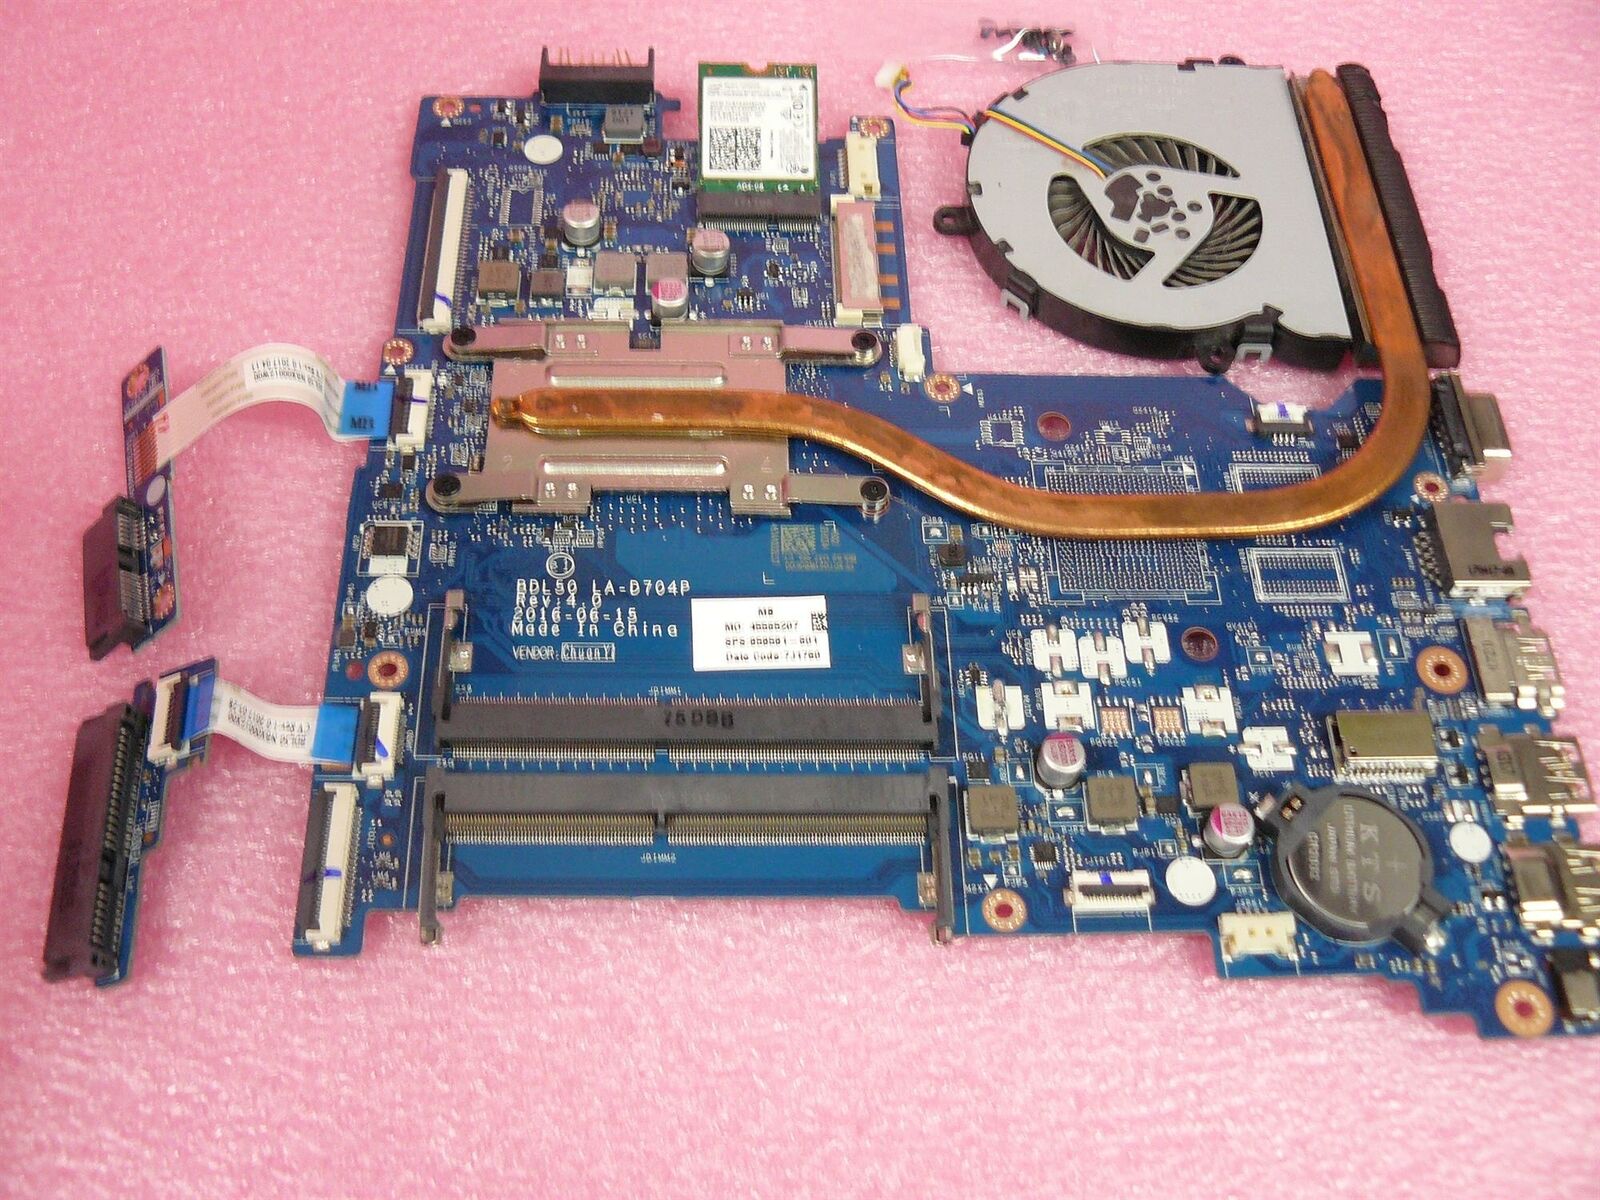 HP 250 G5 MOTHERBOARD BDL50 LA-D704P 858581-601 Category: Computer Location: LT18 Brand: HP Ignore Me: Use